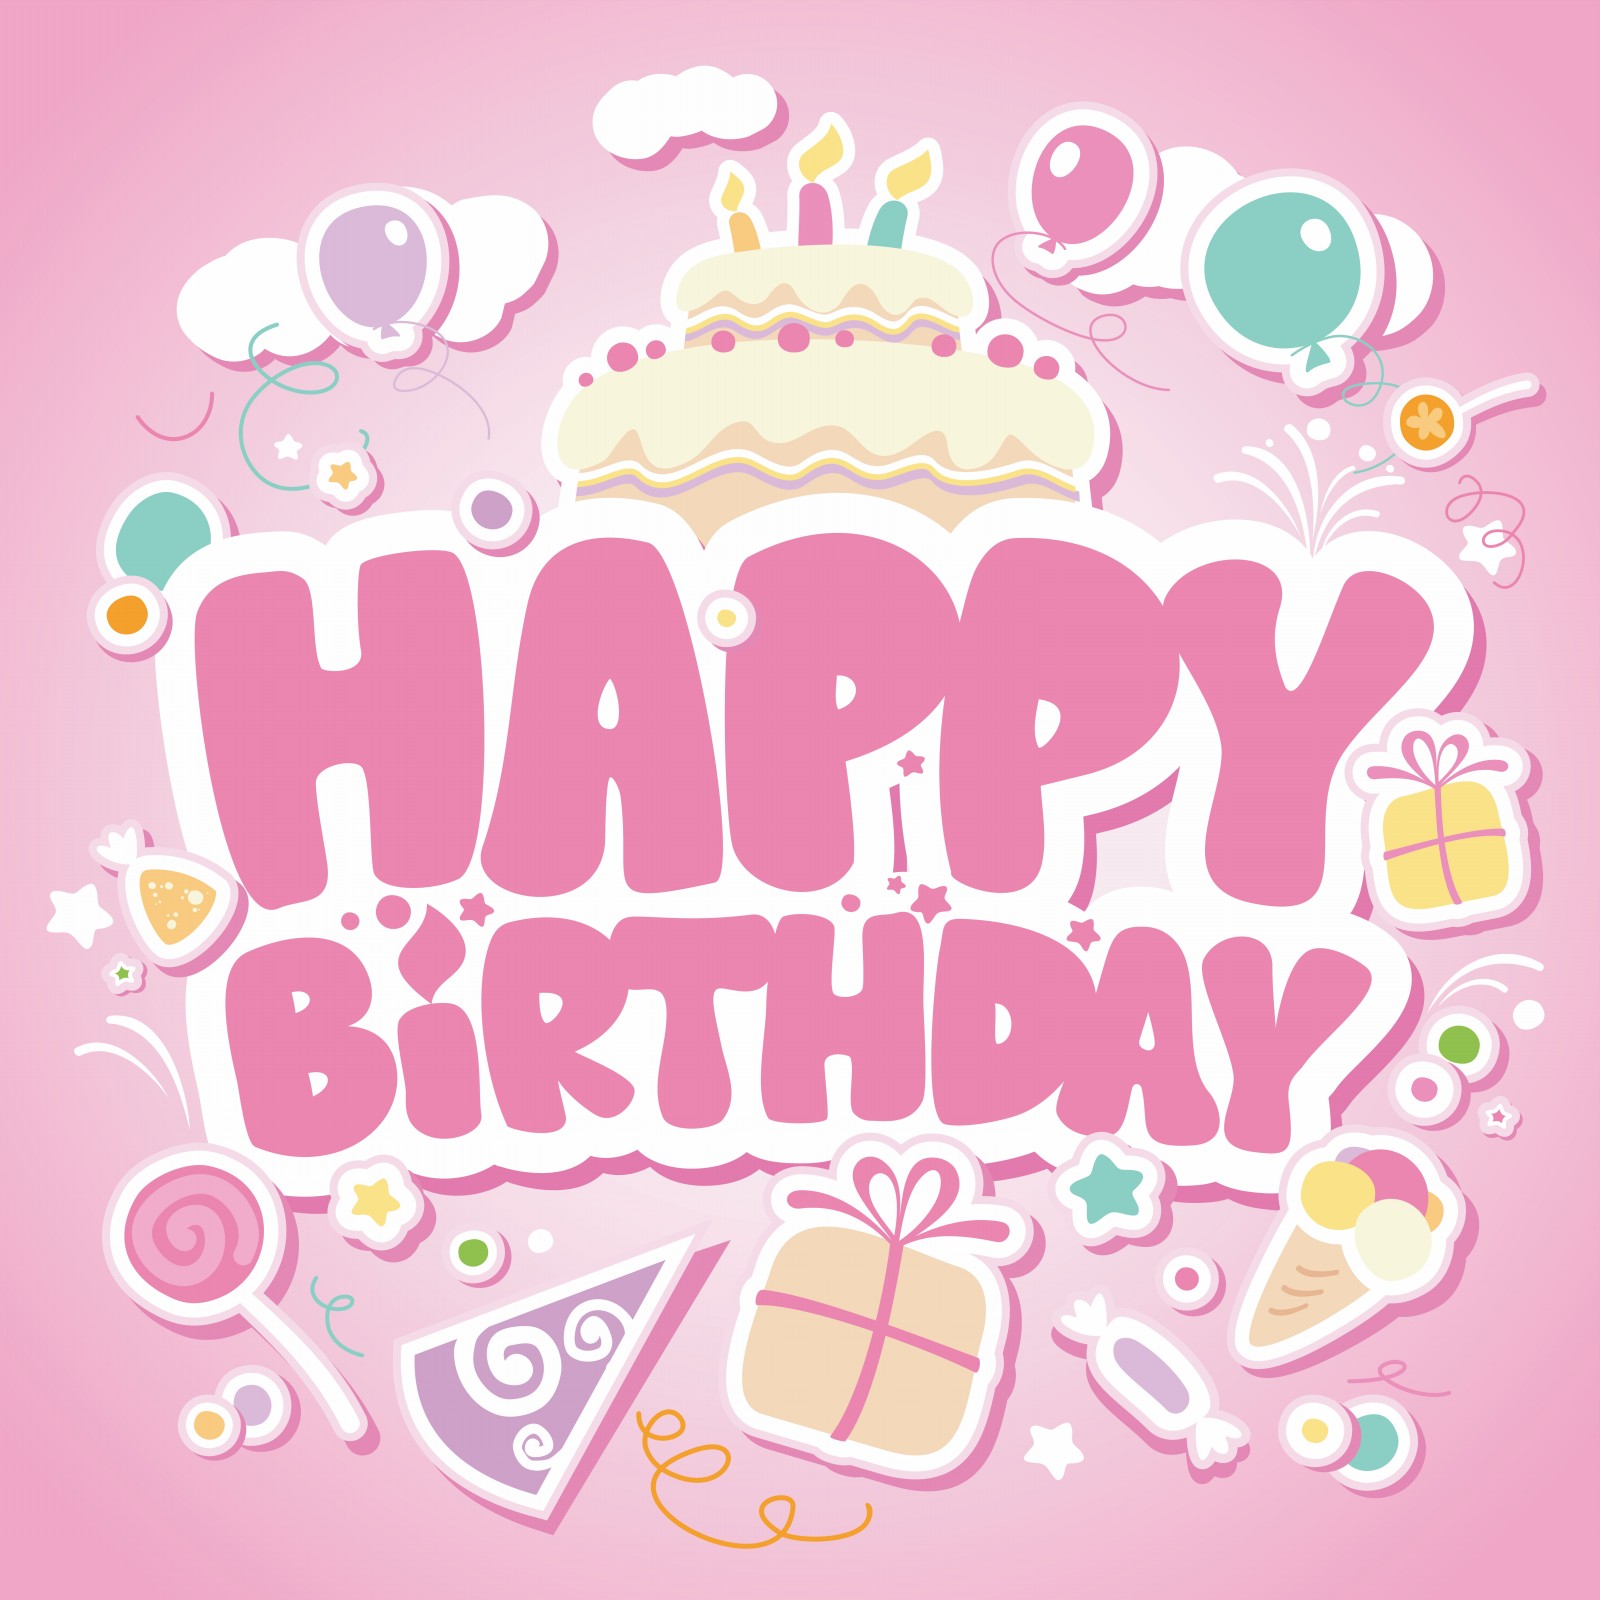 Cute happy birthday images